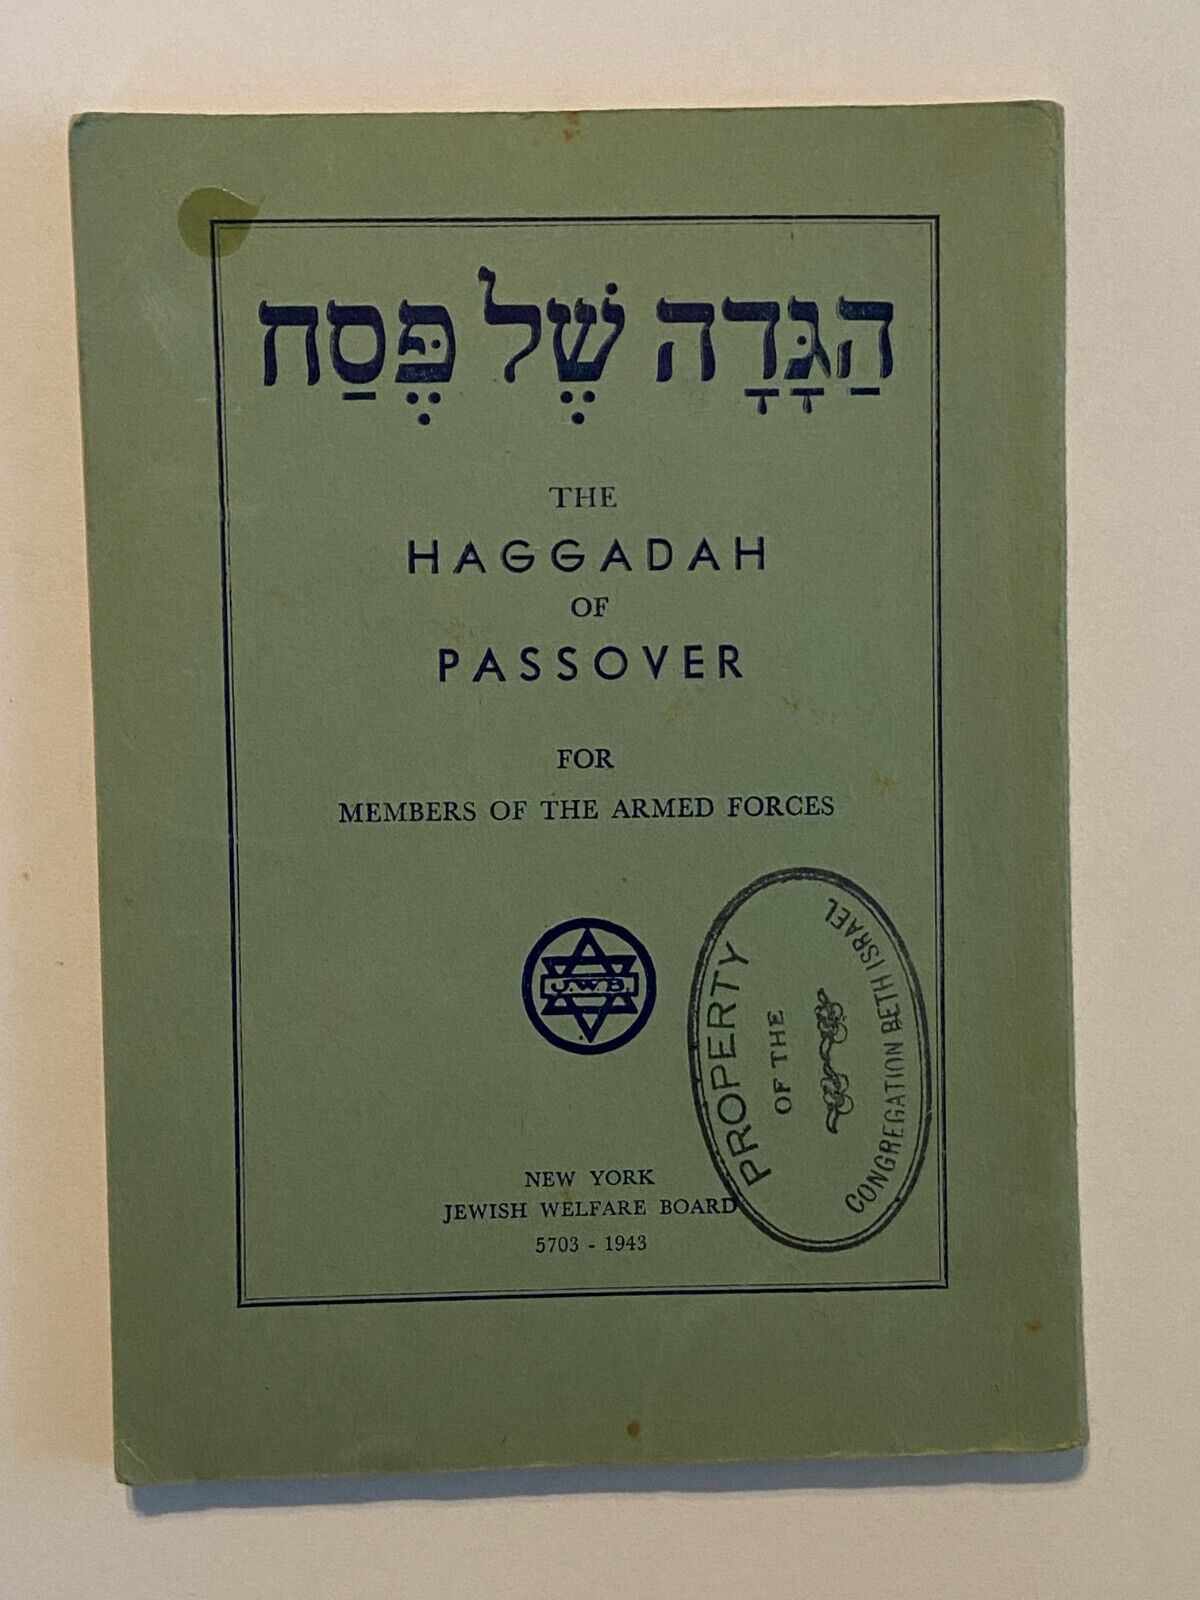 Vintage 1943 Armed Forces Passover Haggadah